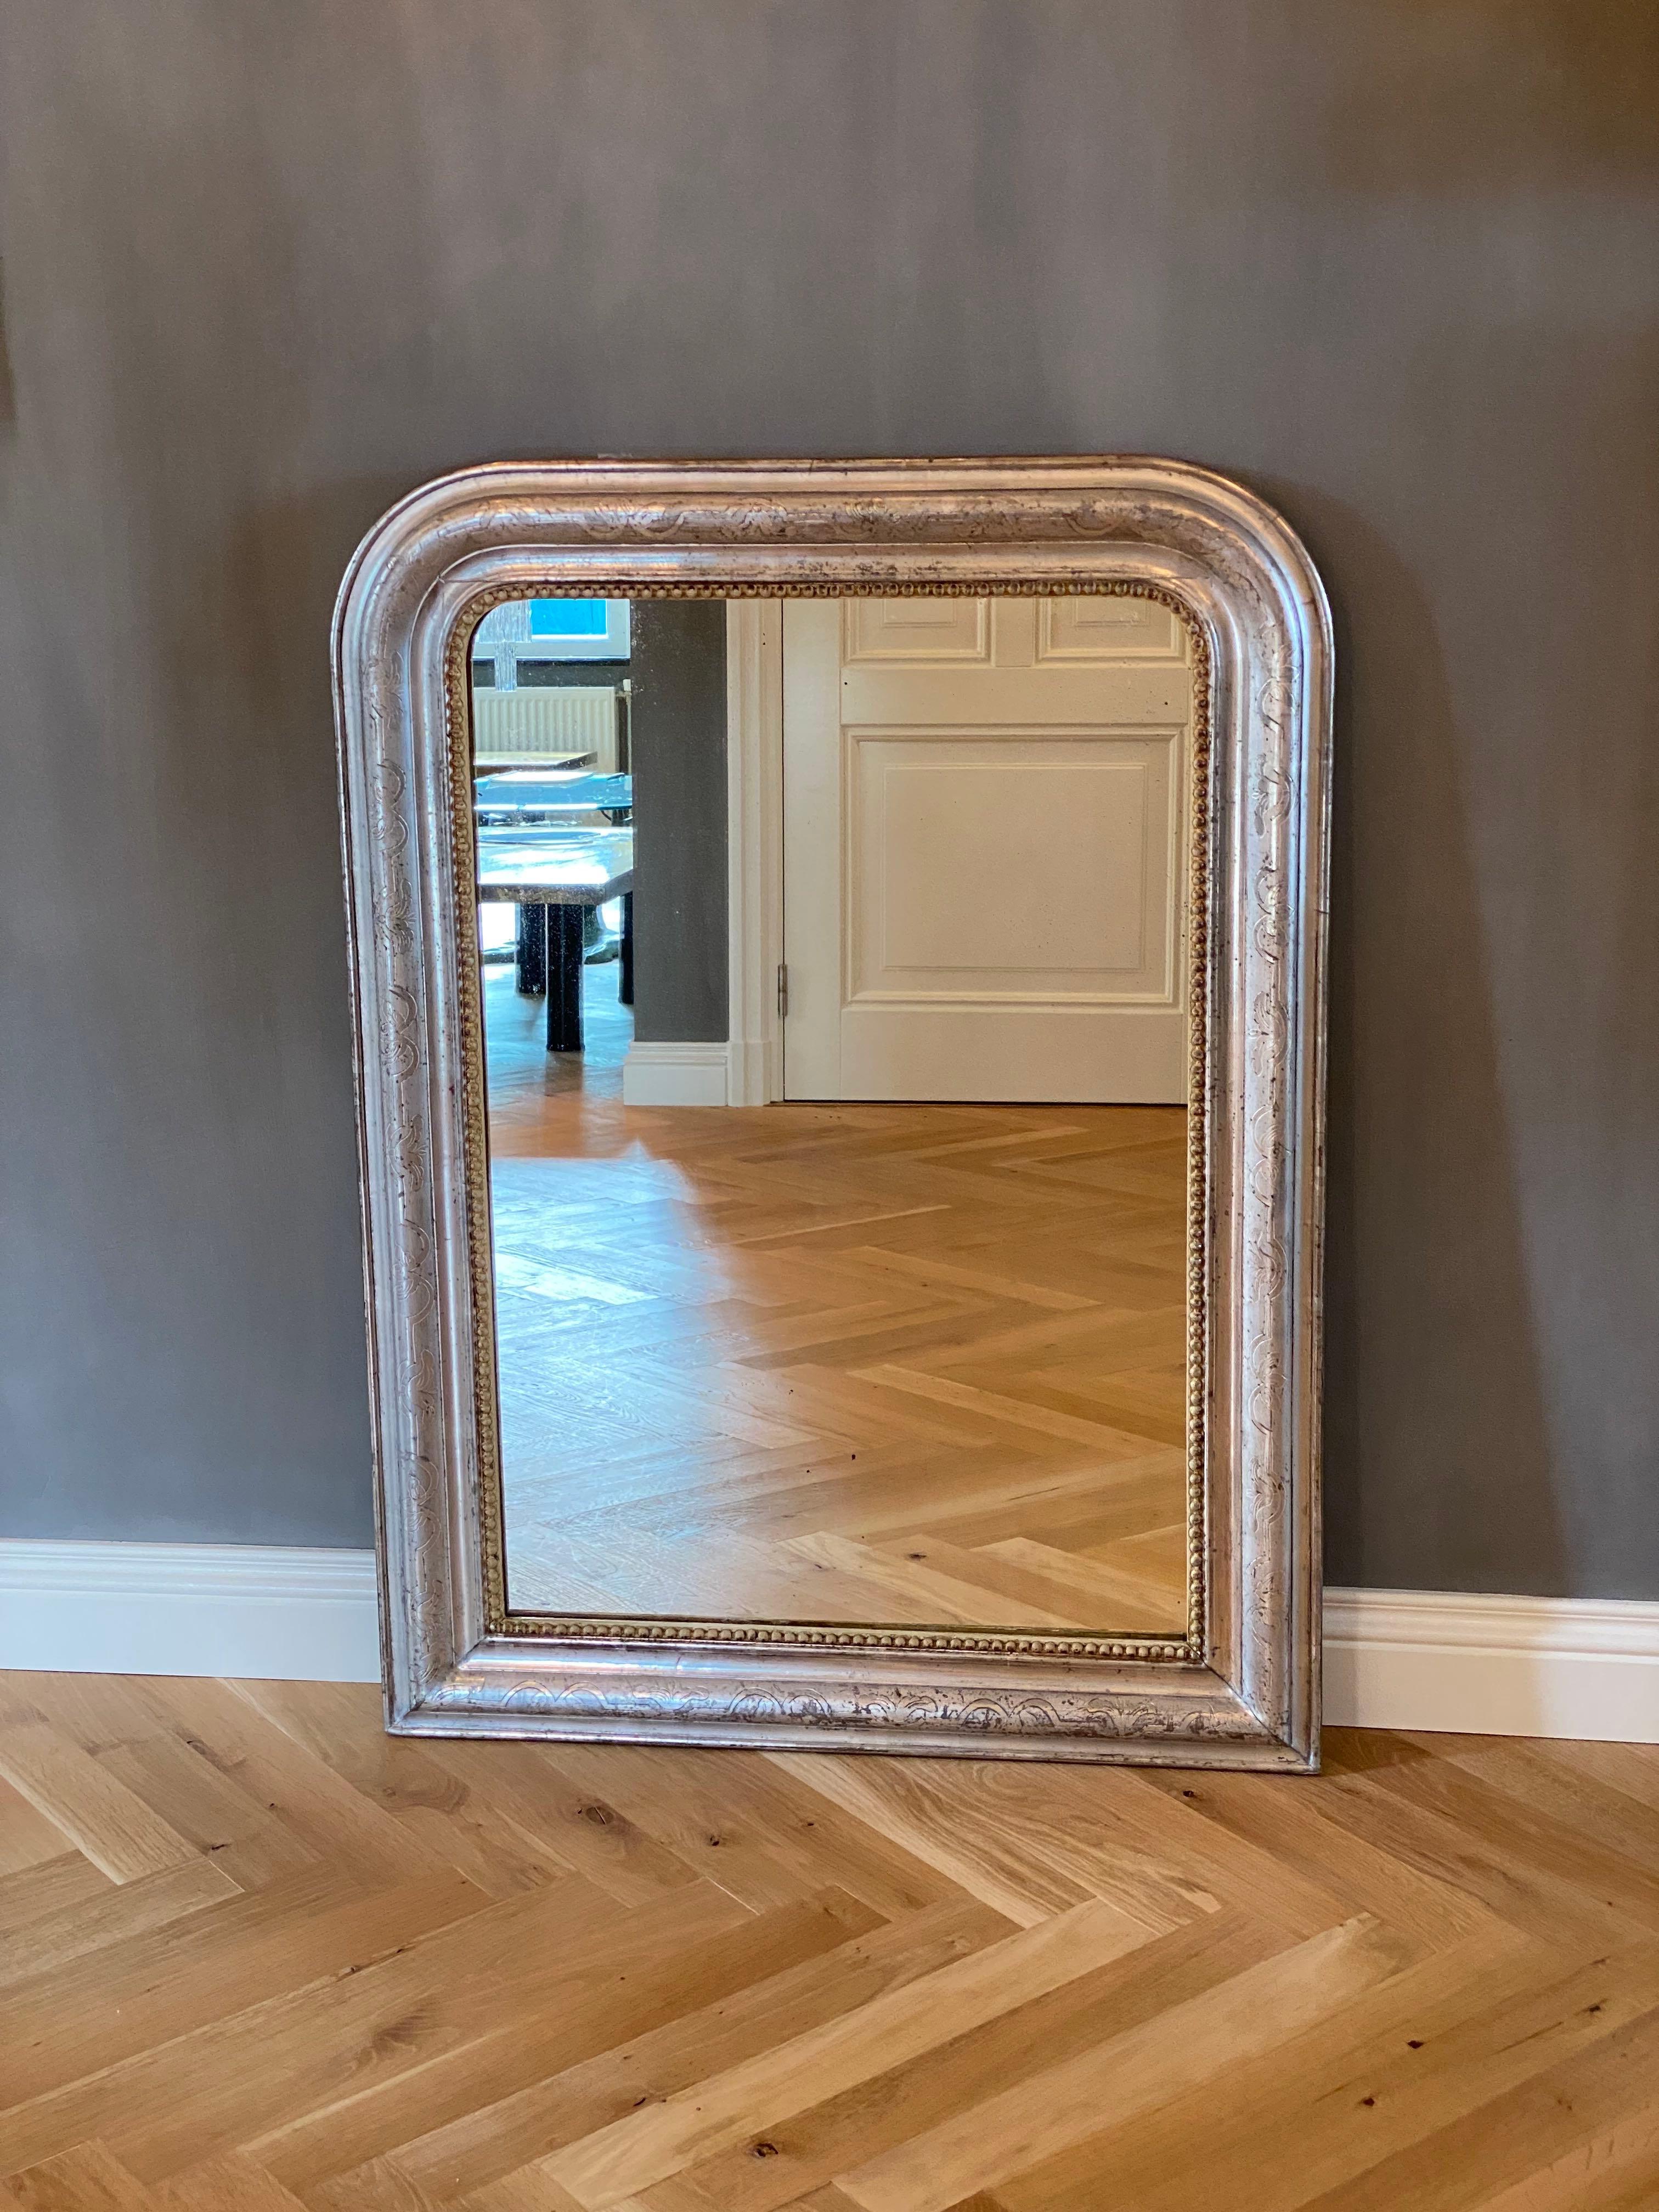 A pretty 19th century French mirror Louis-Philippe with its original antique glass and silver leaf gilding.
The frame is etched with foliate motifs and has a beaded edge.
The mirror has an original wooden back.